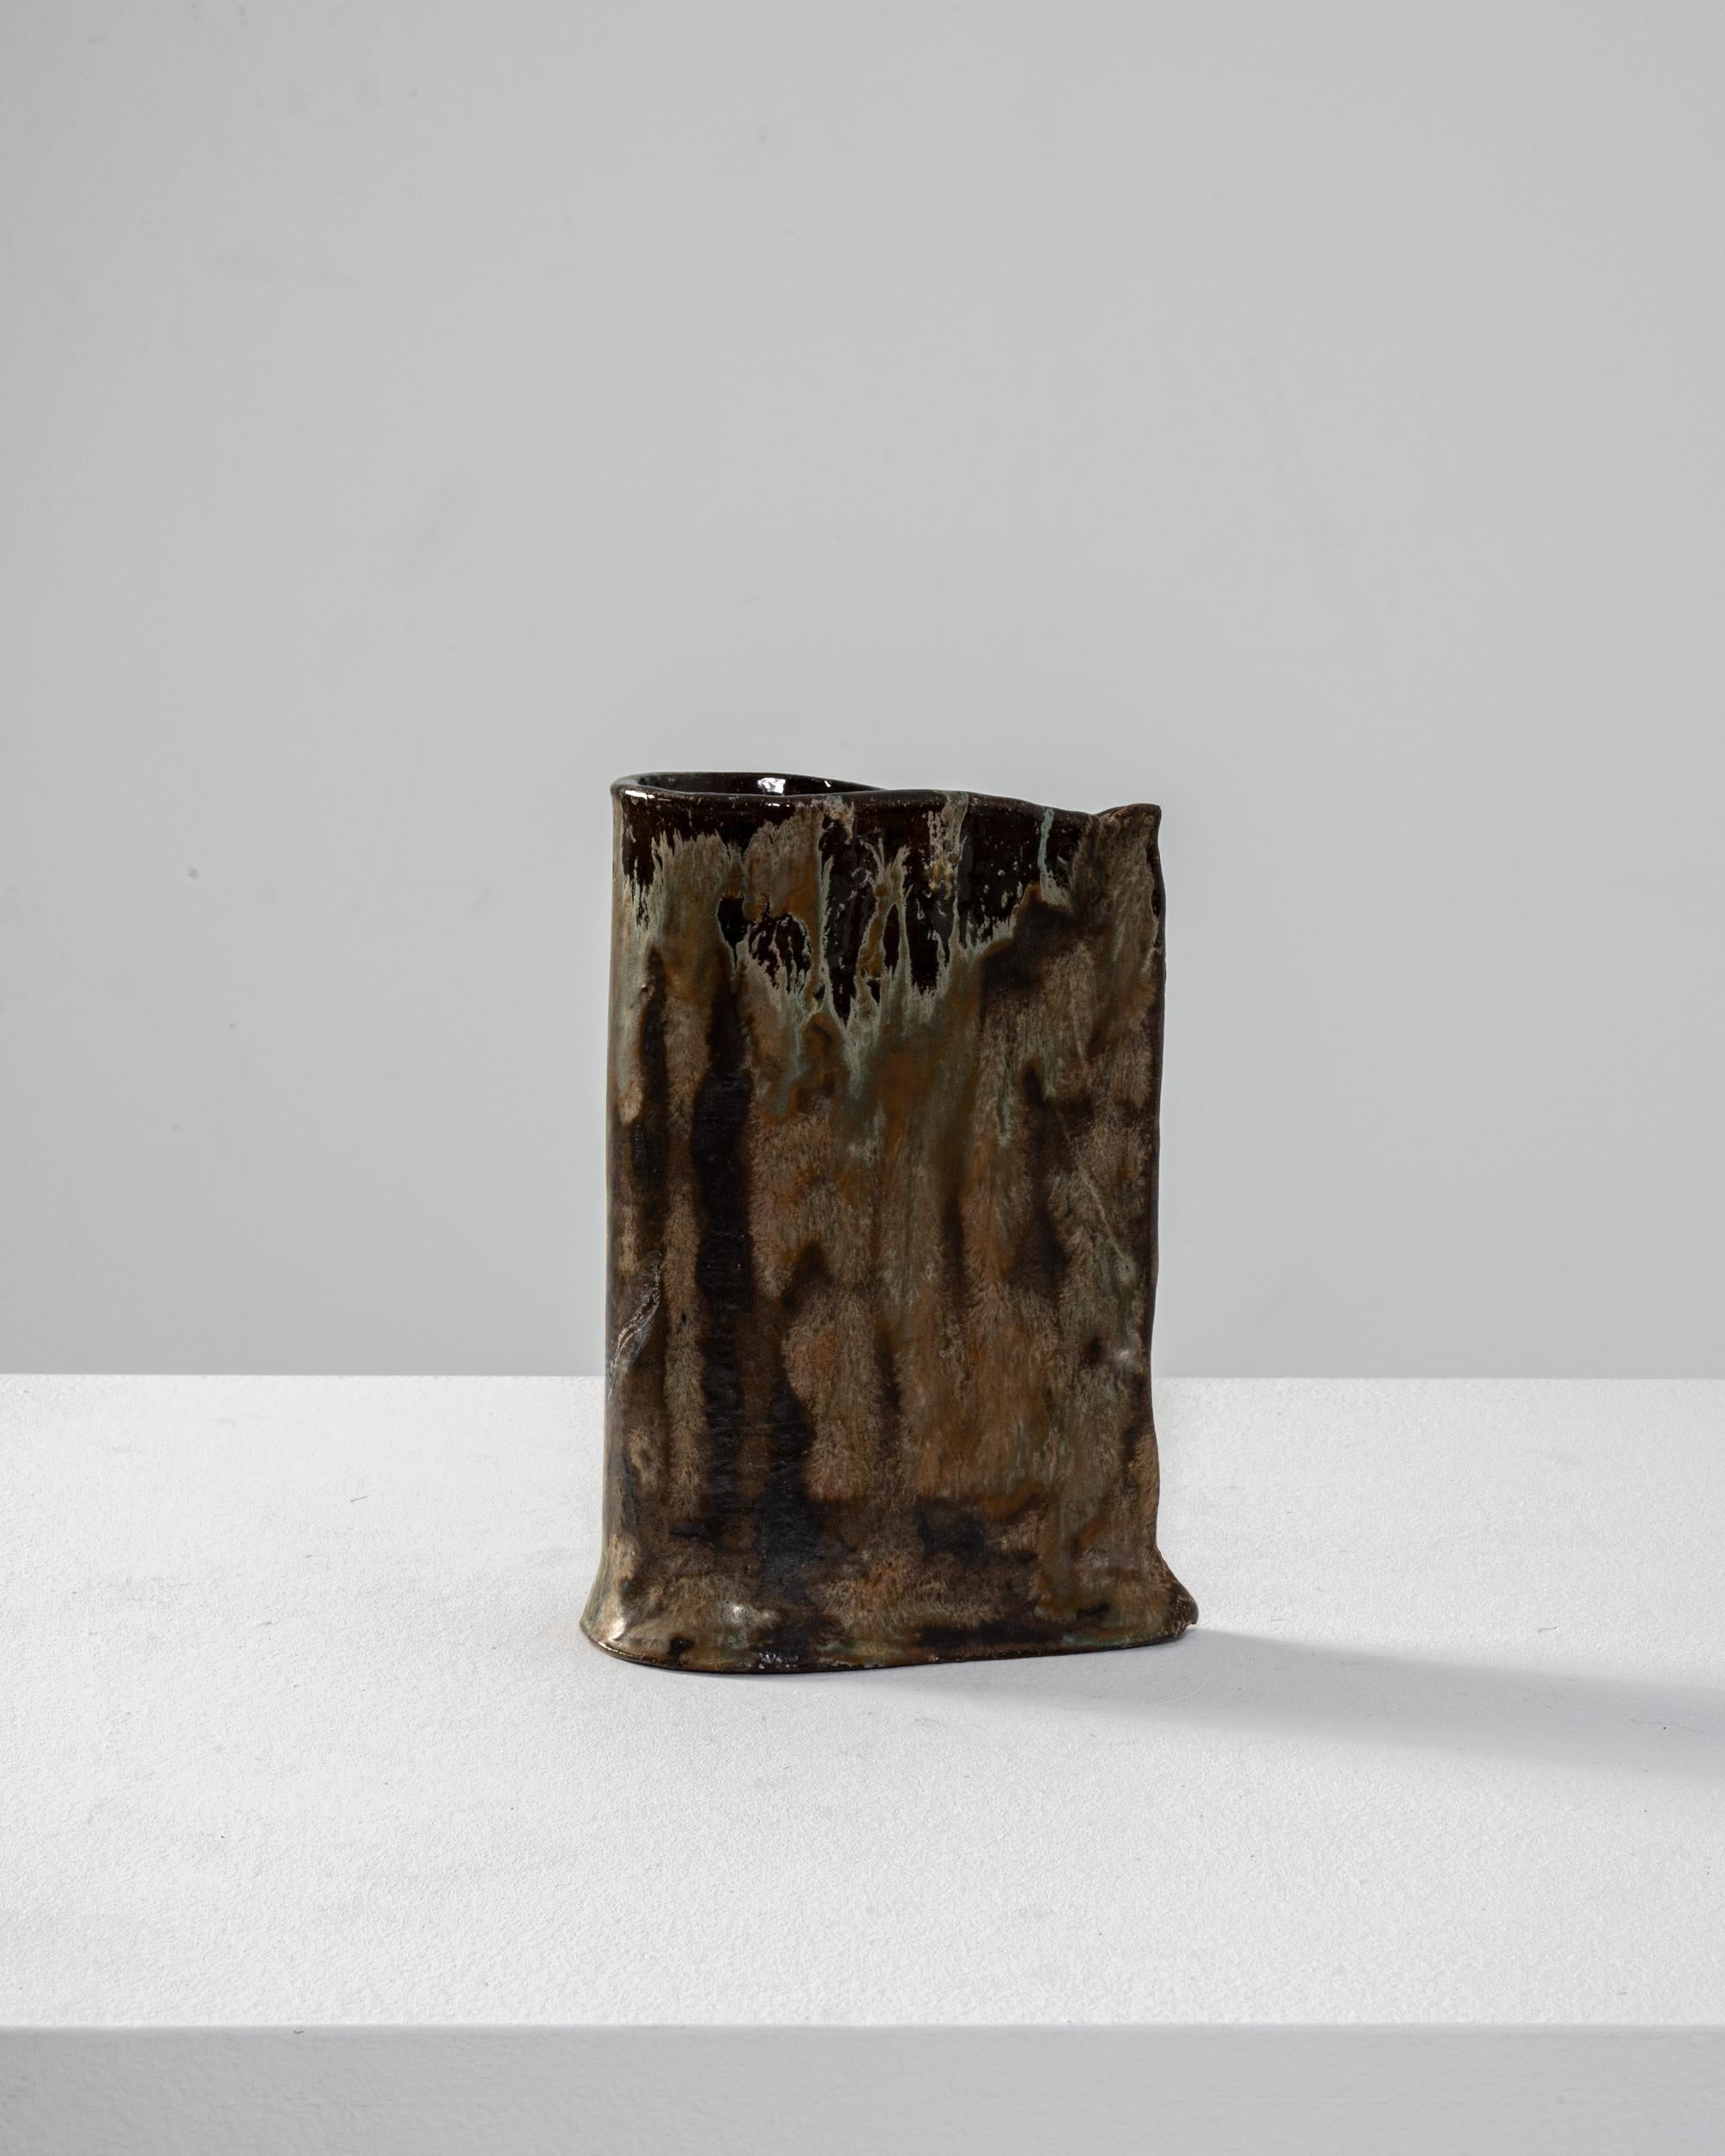 Dark clay and an unusual, textural glaze lend this Organic Modern ceramic vase an attractive intensity. Made in Germany in the 20th century, the form itself is crude and asymmetric, deliberately naive. A single sheet of clay is doubled back on